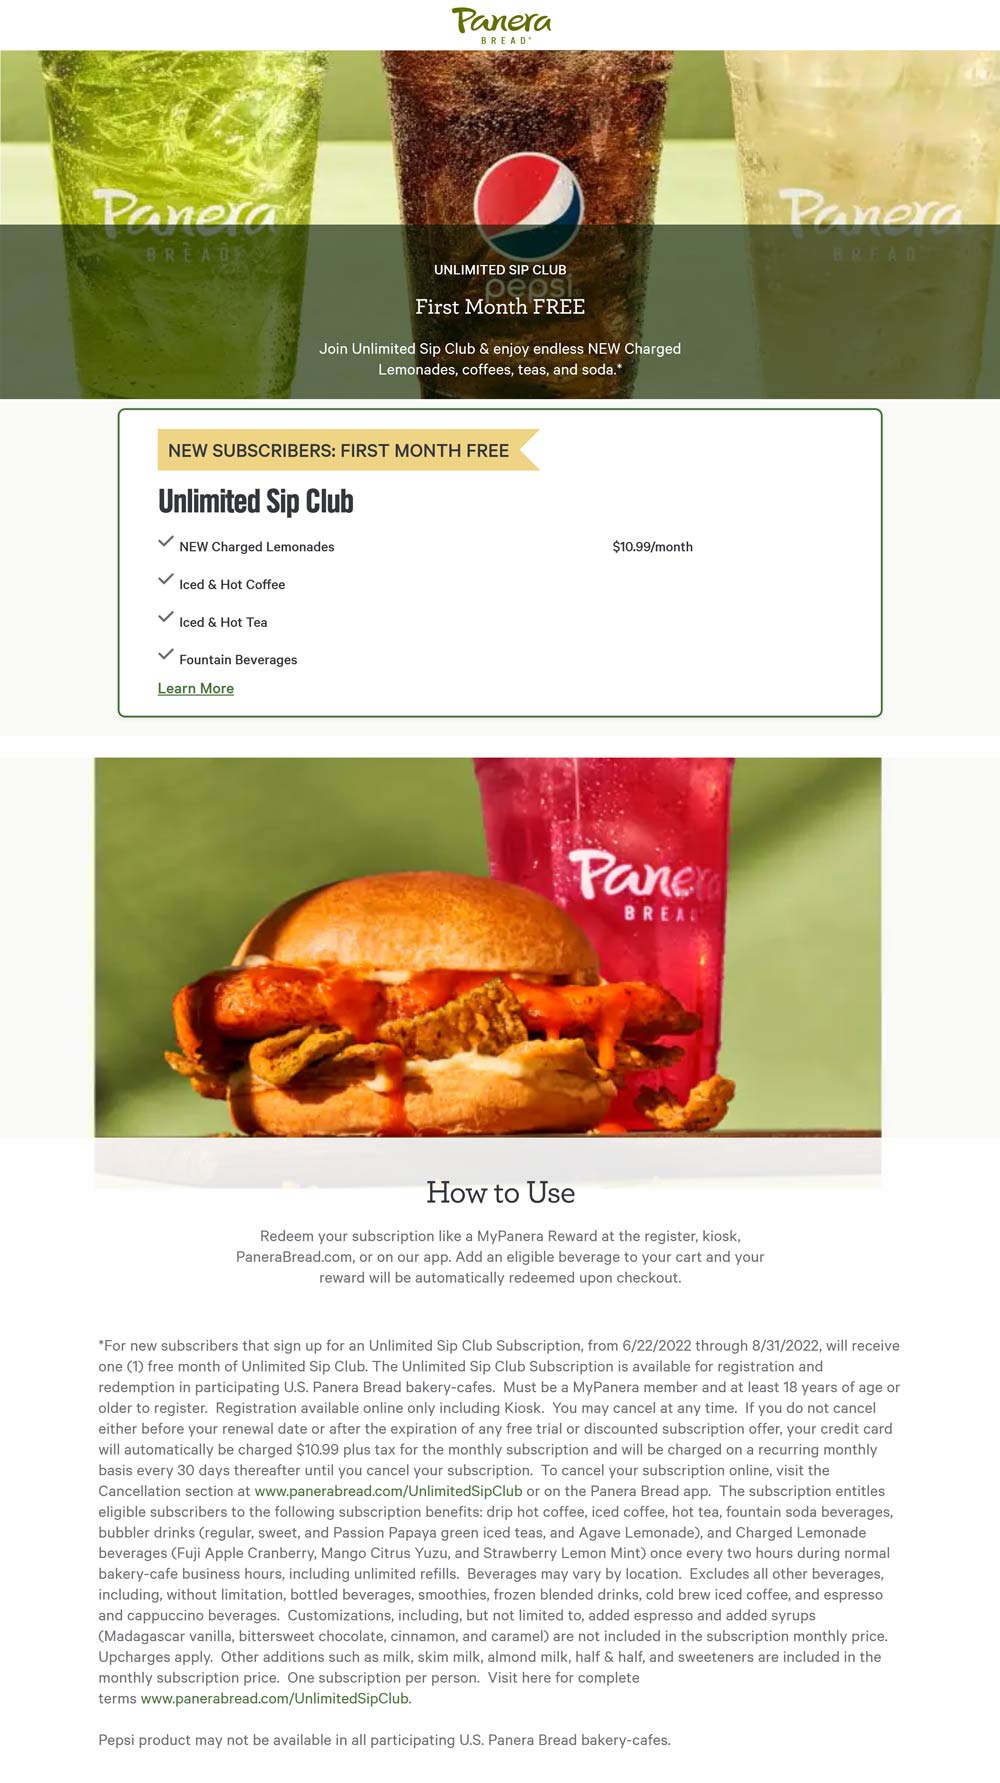 Panera Bread restaurants Coupon  Free month of unlimited drinks at Panera Bread for new signups #panerabread 